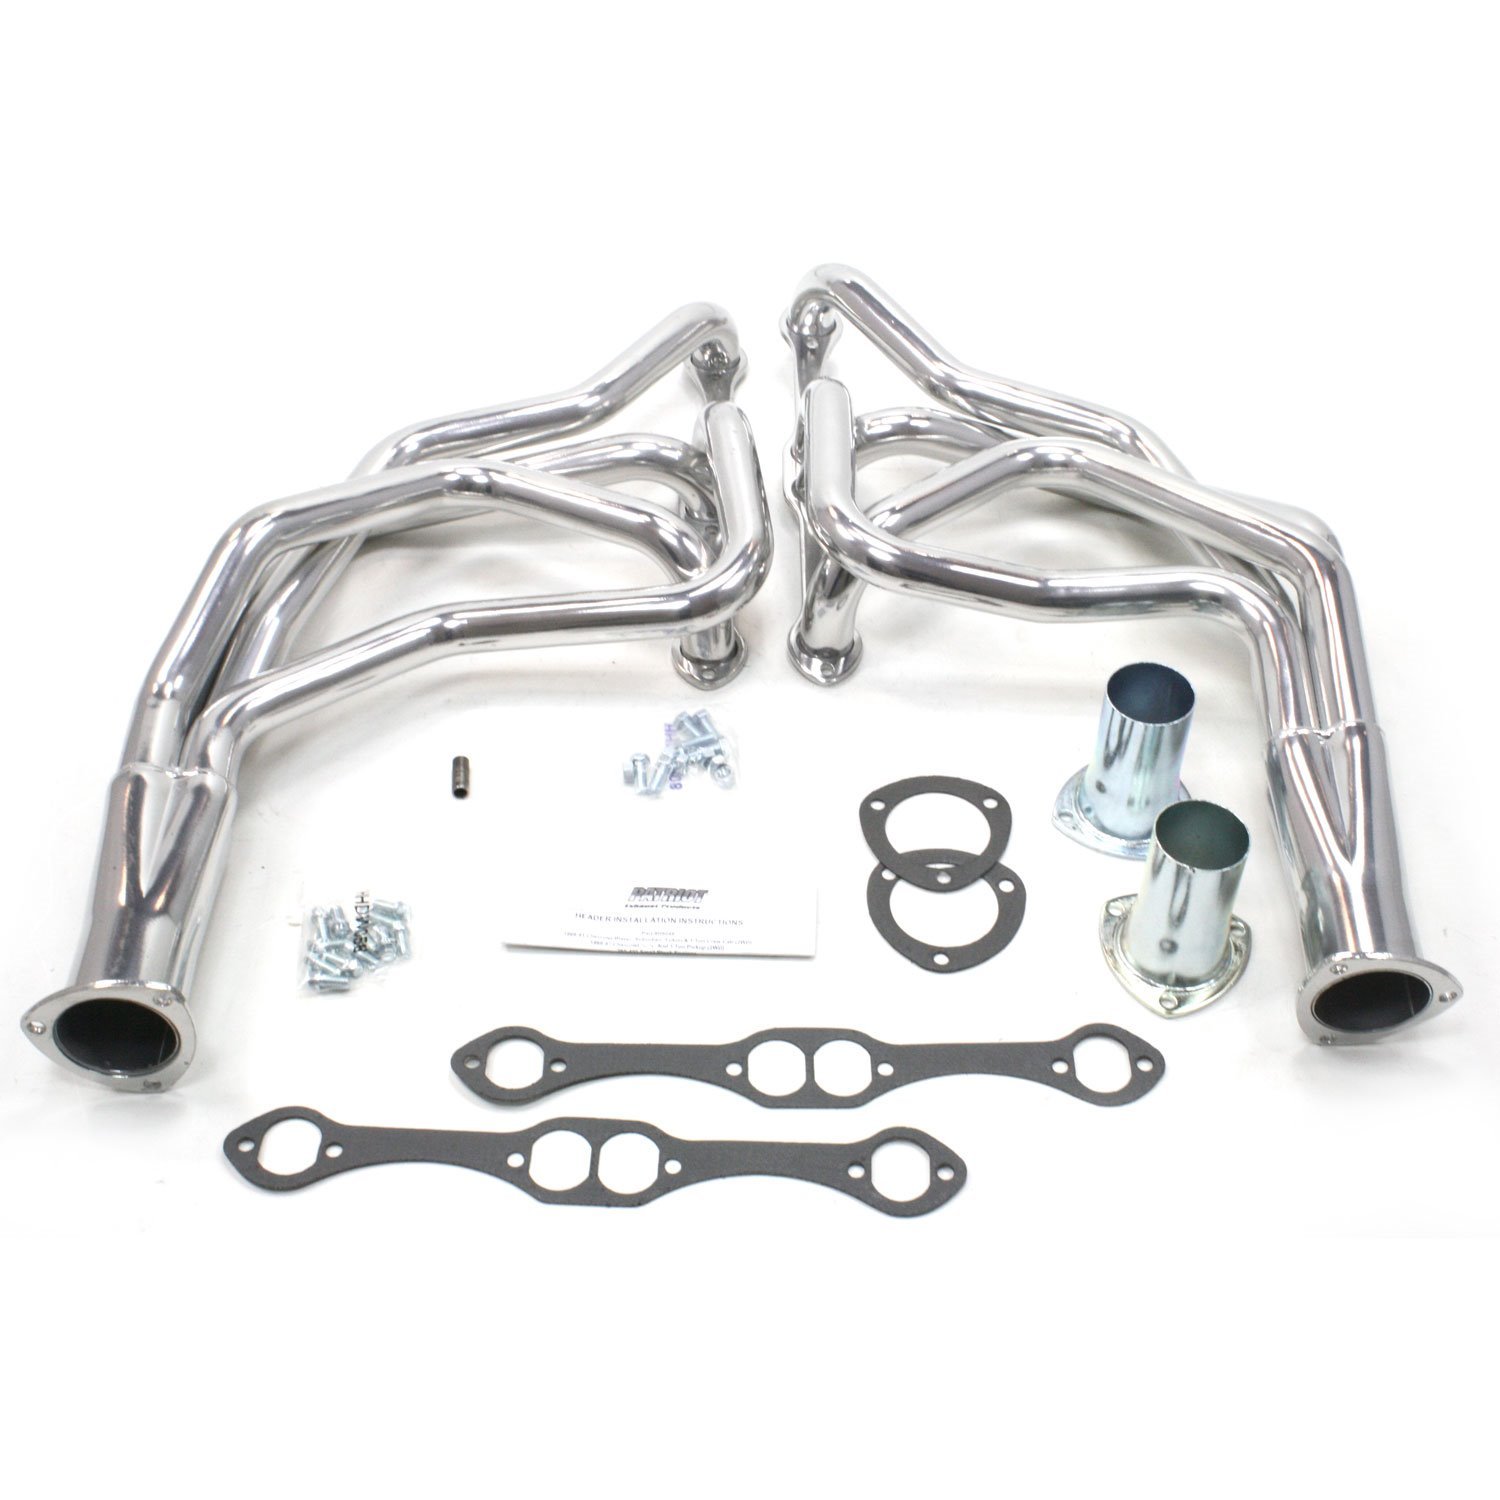 GM Specific Fit Headers 2WD Full-Size Pickup Truck